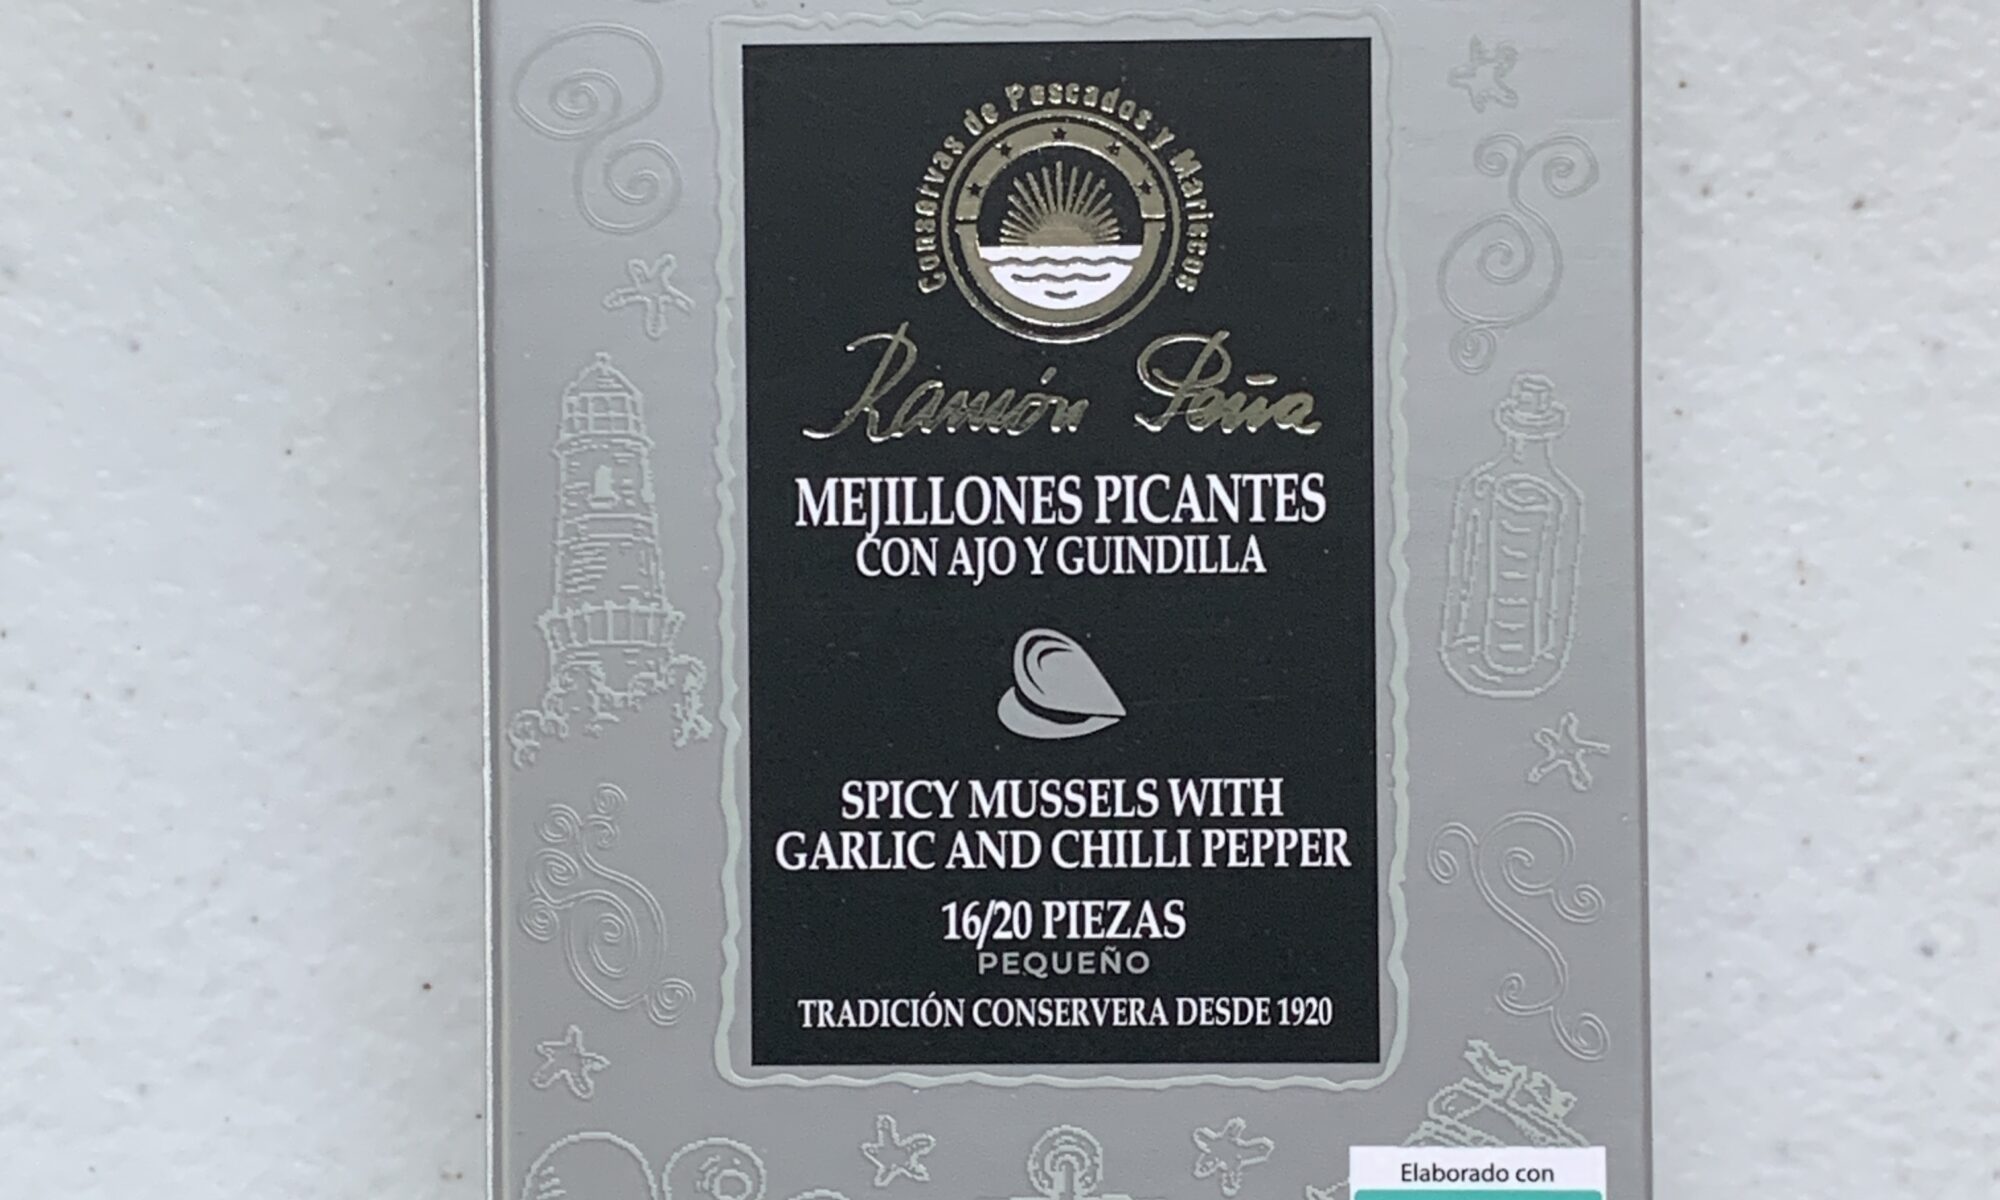 Image of the front of a package of Ramón Peña Spicy Mussels with Garlic and Chilli Pepper 16/20